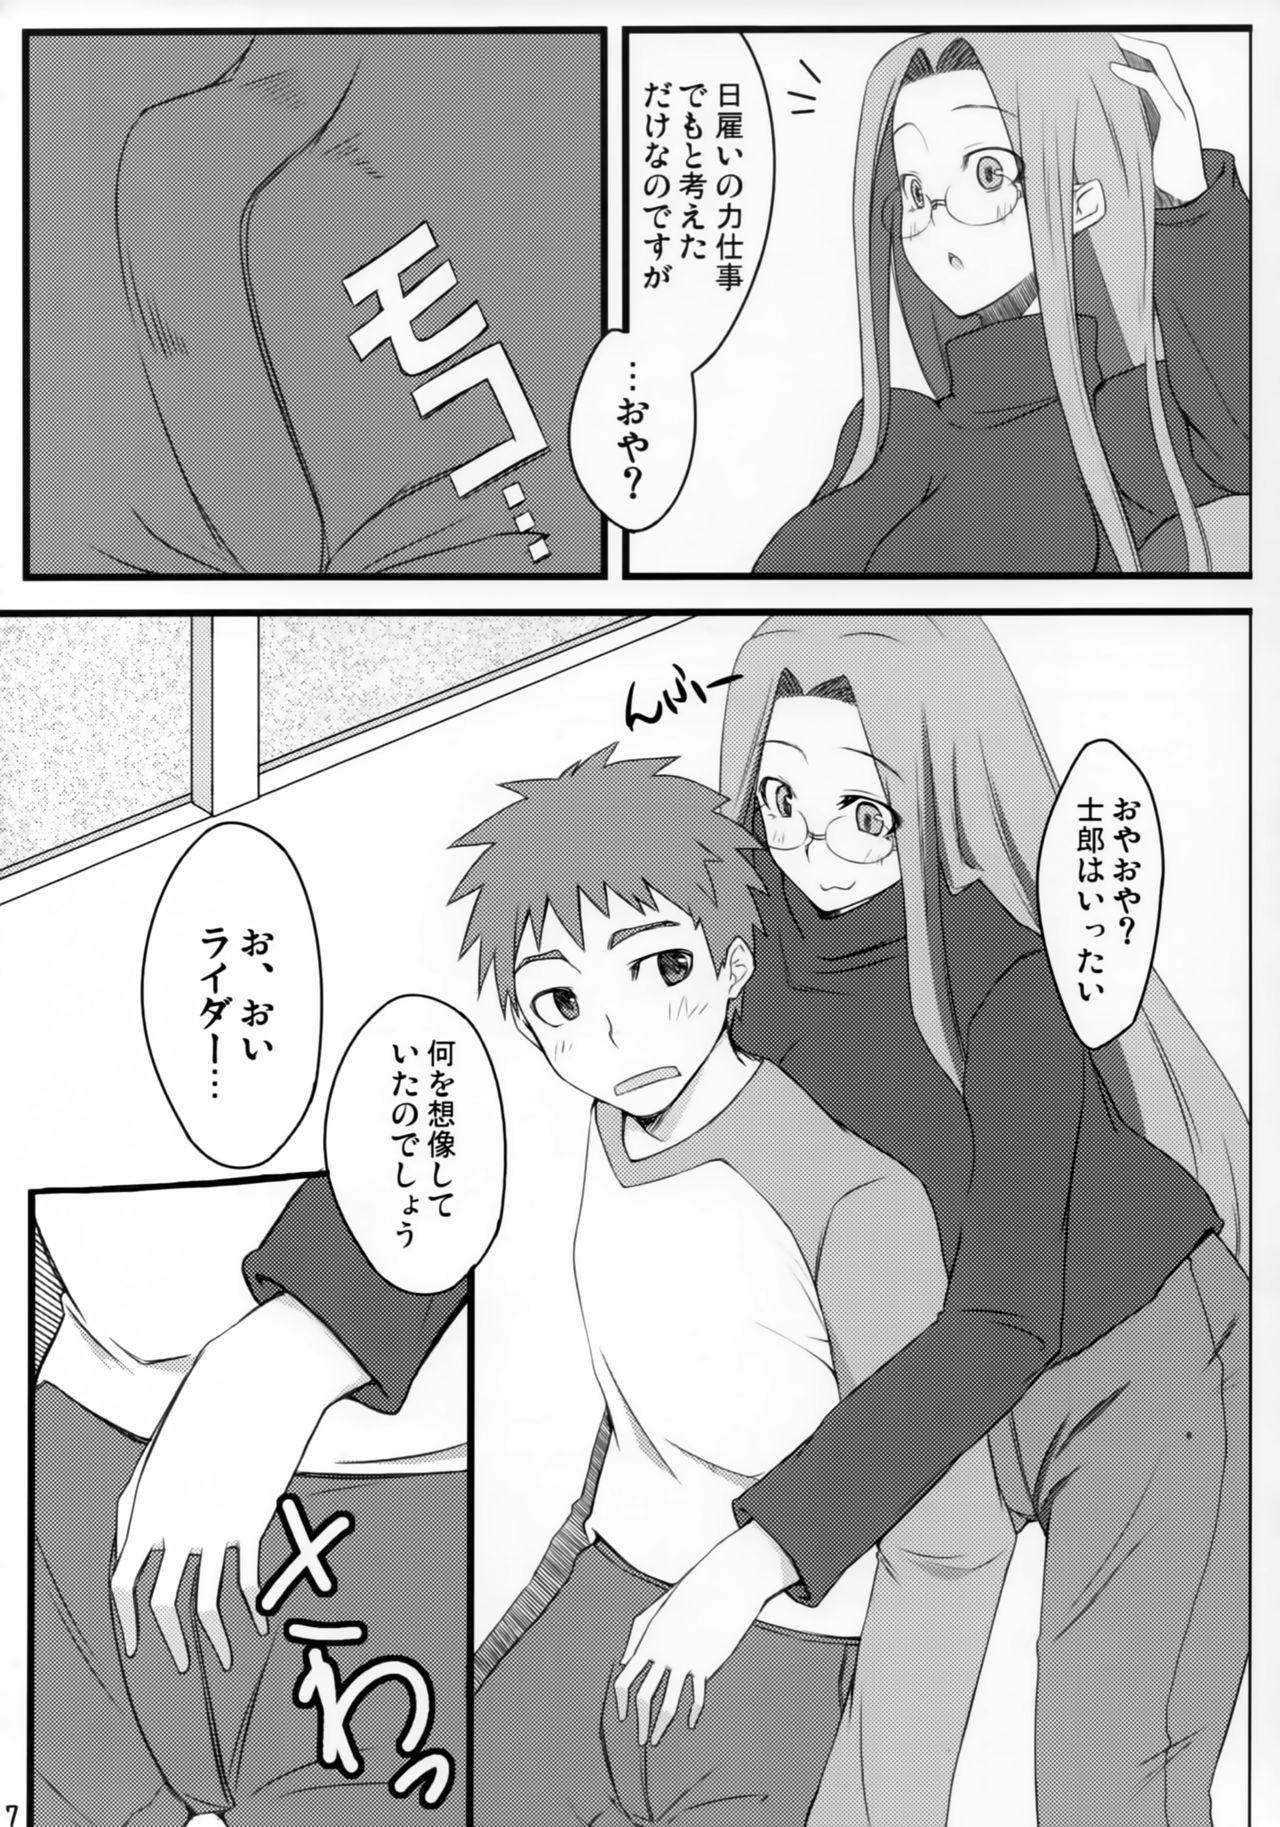 Negao R4 - Fate stay night Spoon - Page 6